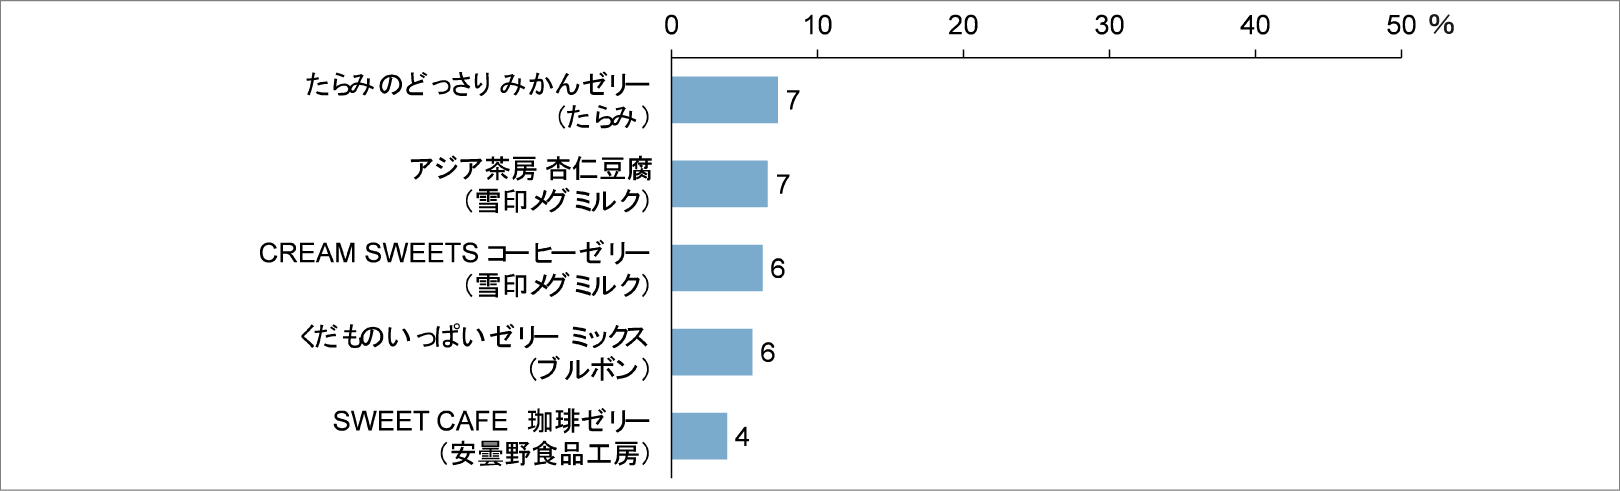 201812-14-fig-03.png